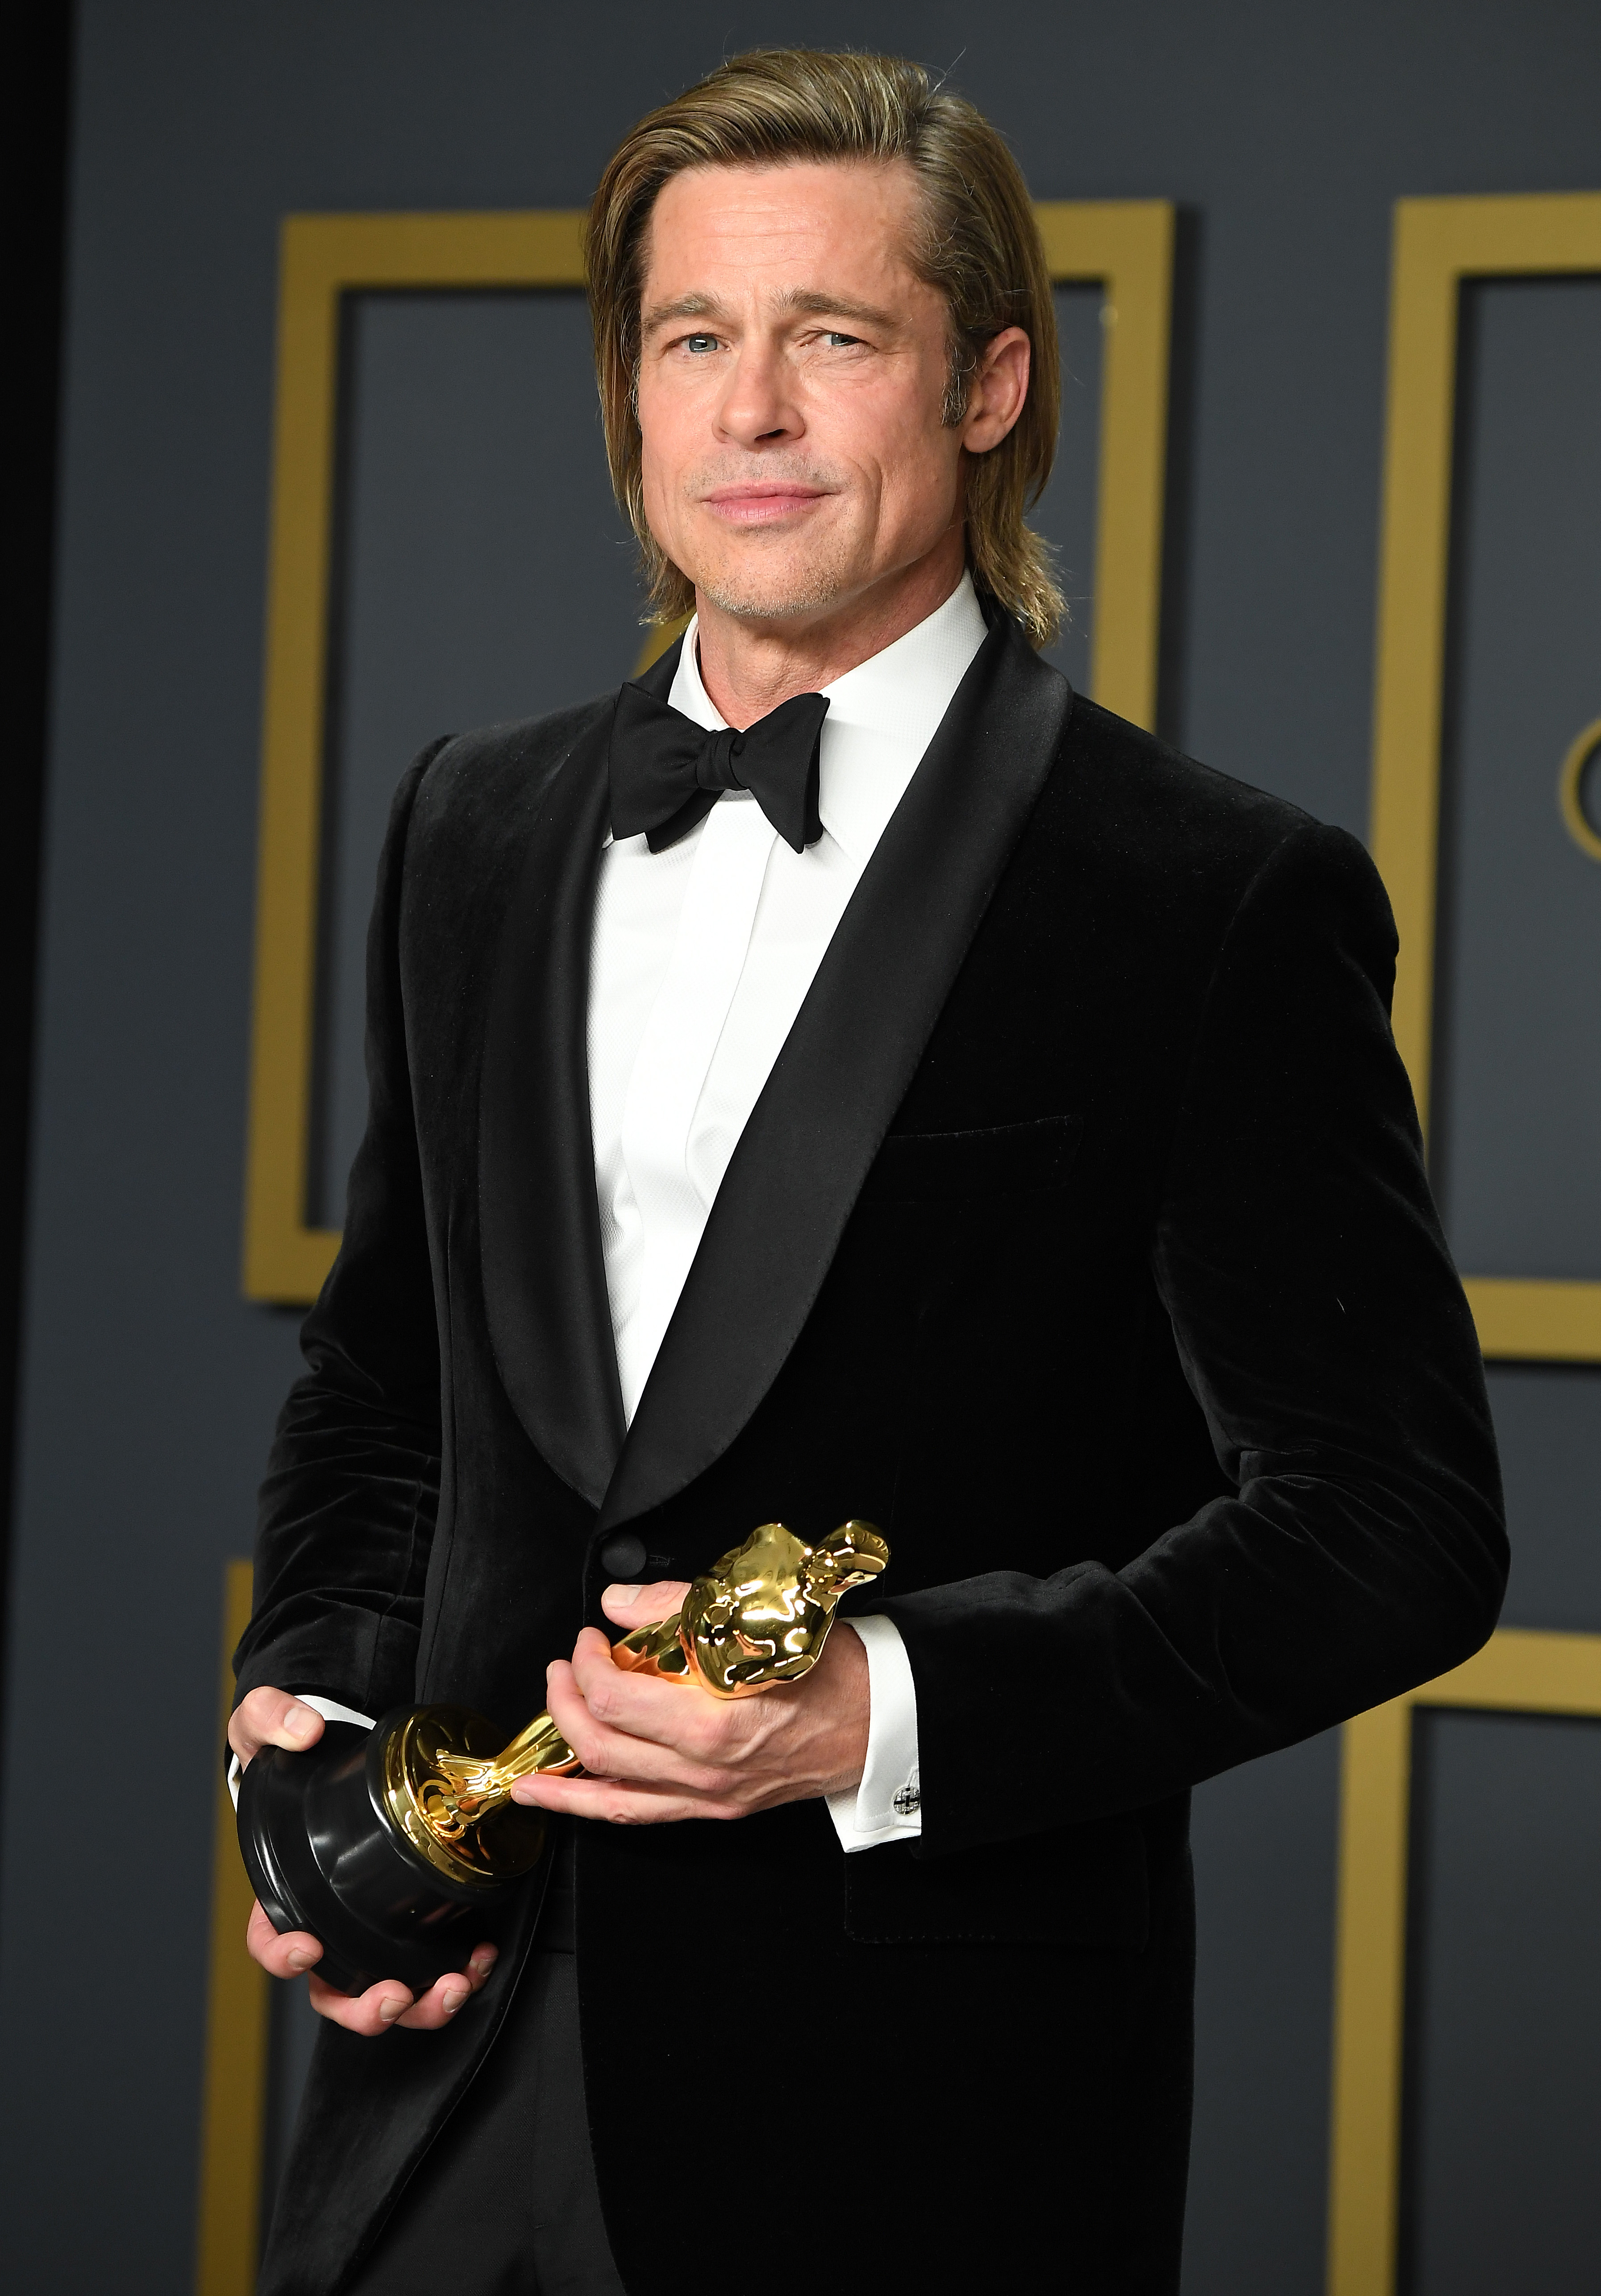 Brad Pitt at the 92nd Annual Academy Awards in Hollywood, 2020 | Source: Getty Images